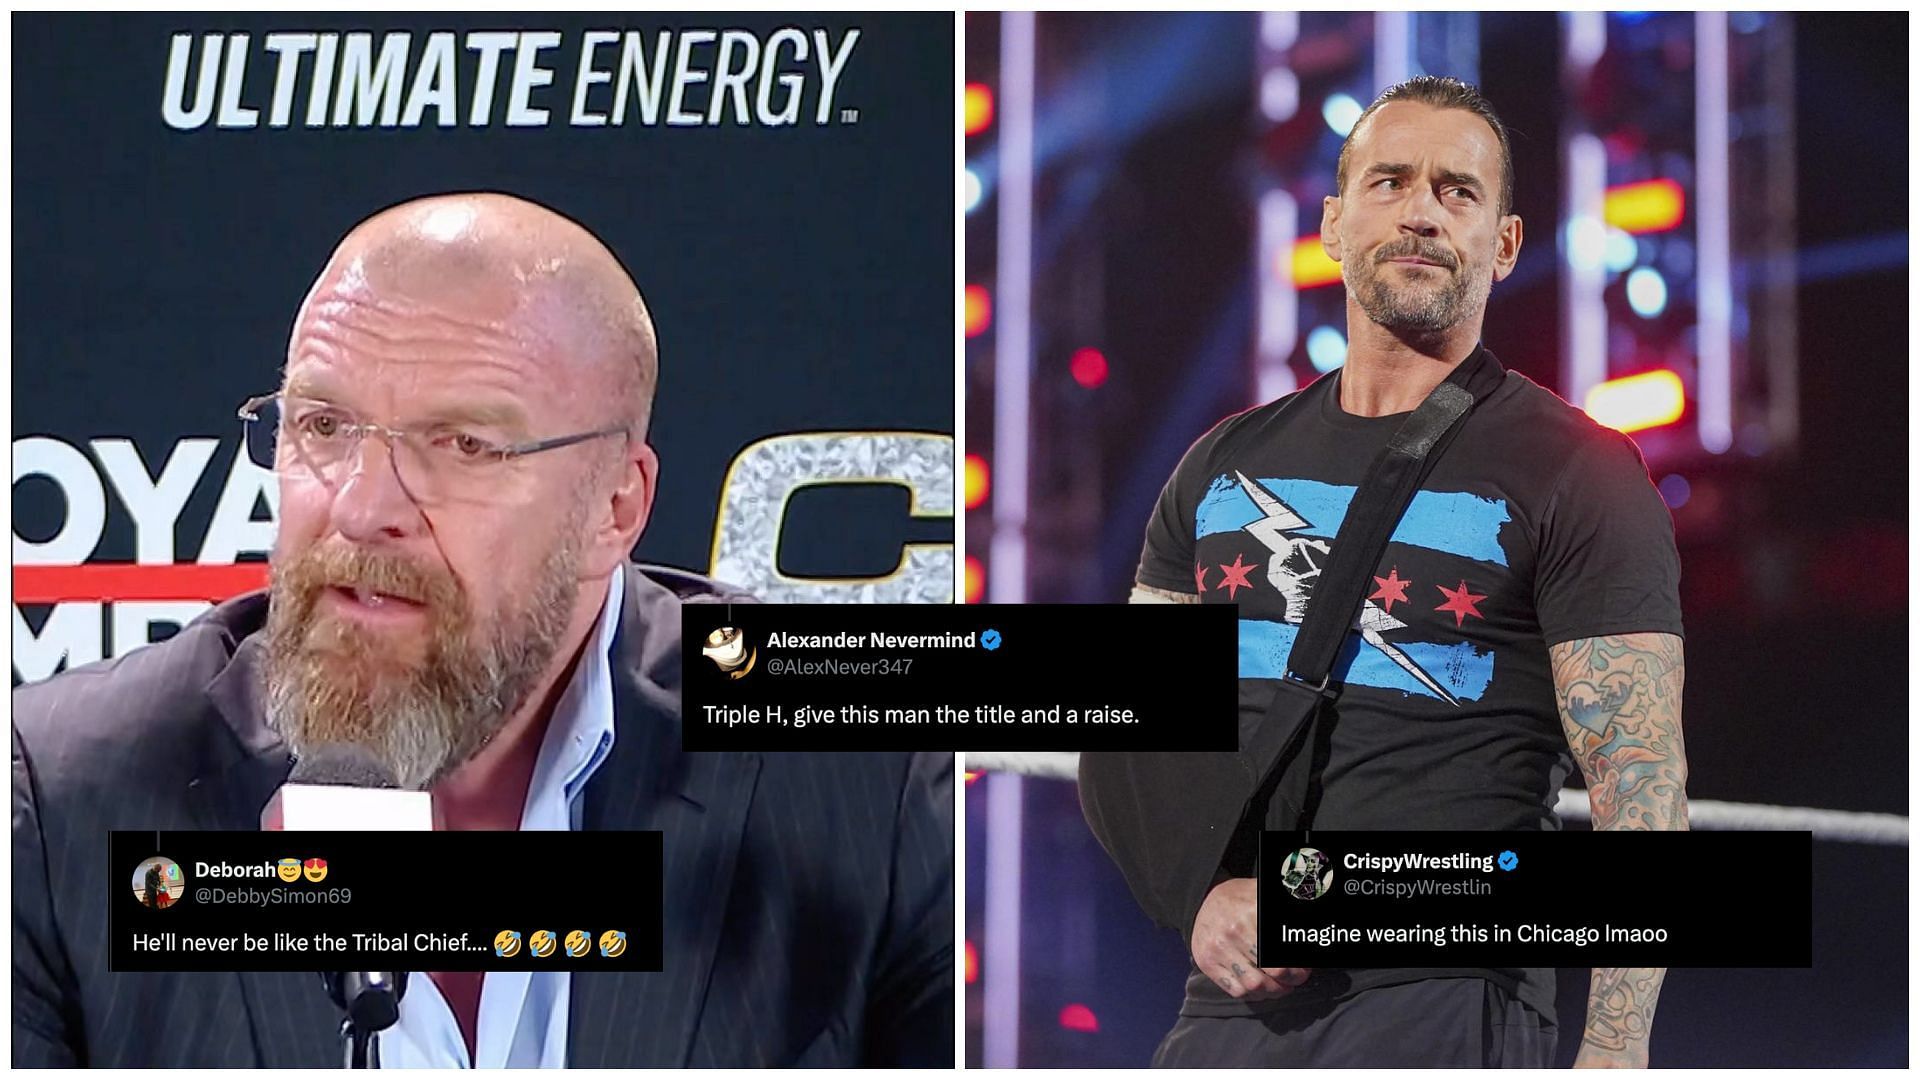 Triple H (left) and CM Punk (right).